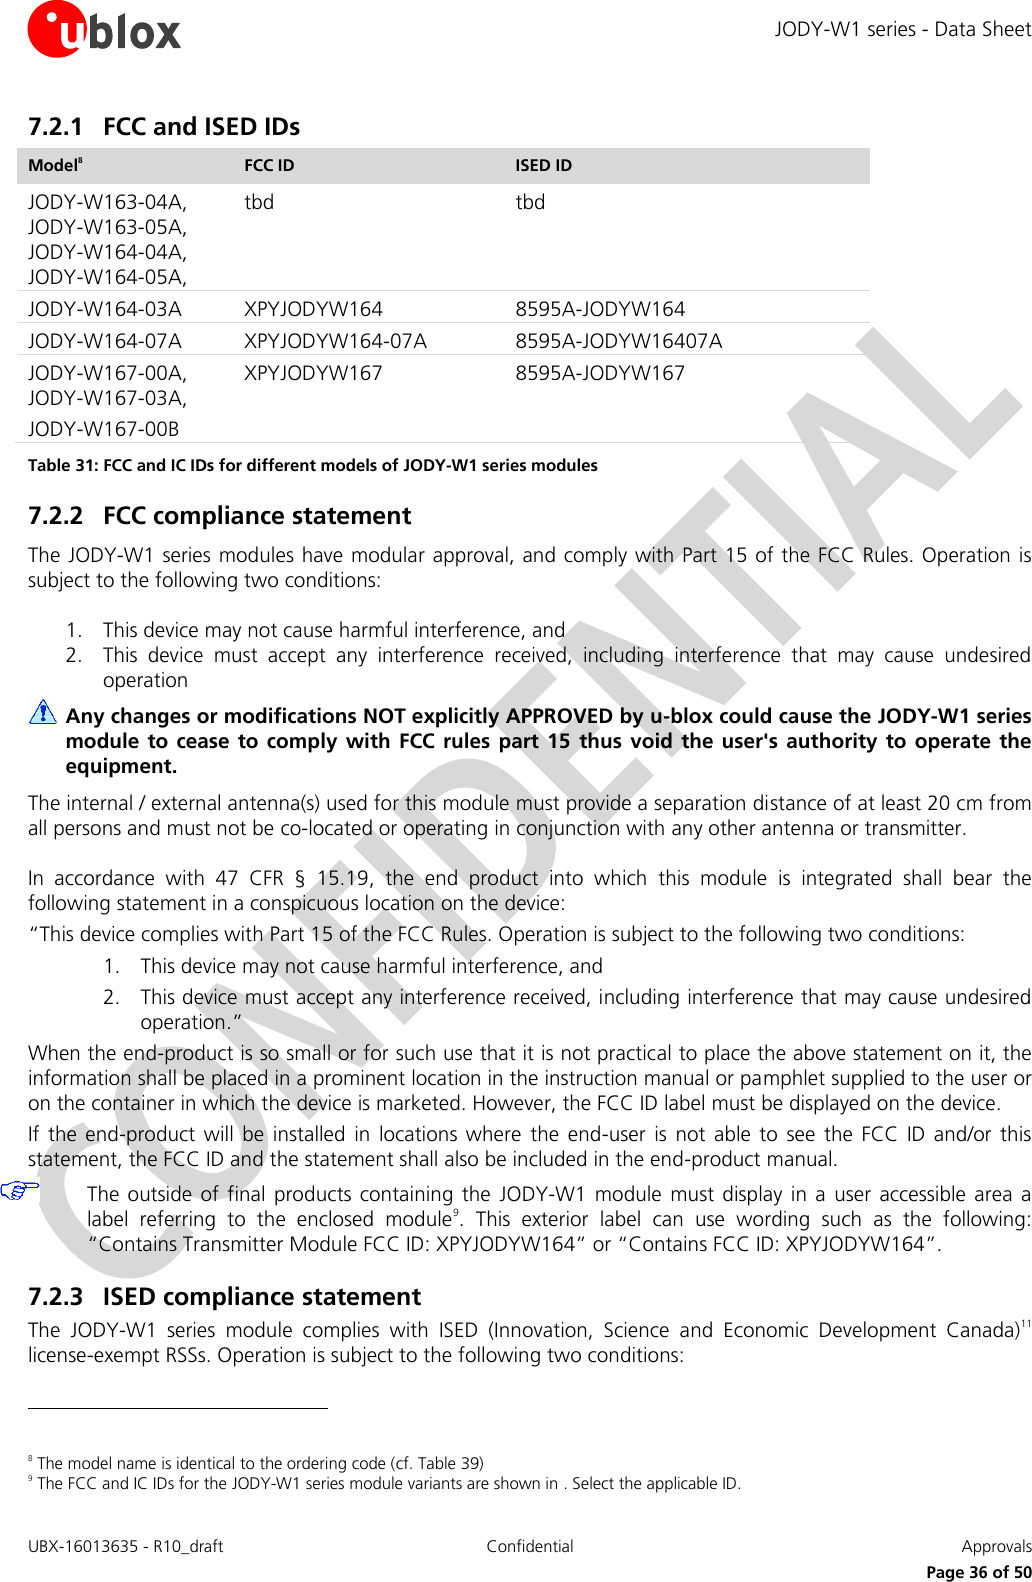 JODY-W1 series - Data Sheet UBX-16013635 - R10_draft Confidential  Approvals     Page 36 of 50 7.2.1 FCC and ISED IDs Model8 FCC ID ISED ID JODY-W163-04A, JODY-W163-05A, JODY-W164-04A, JODY-W164-05A, tbd tbd JODY-W164-03A XPYJODYW164 8595A-JODYW164 JODY-W164-07A XPYJODYW164-07A 8595A-JODYW16407A JODY-W167-00A, JODY-W167-03A, JODY-W167-00B XPYJODYW167 8595A-JODYW167 Table 31: FCC and IC IDs for different models of JODY-W1 series modules 7.2.2 FCC compliance statement The JODY-W1 series modules have modular approval, and comply with Part 15 of the FCC Rules. Operation is subject to the following two conditions: 1. This device may not cause harmful interference, and 2. This  device  must  accept  any  interference  received,  including  interference  that  may  cause  undesired operation  Any changes or modifications NOT explicitly APPROVED by u-blox could cause the JODY-W1 series module  to  cease to  comply  with  FCC  rules  part 15  thus void  the user&apos;s authority to  operate  the equipment. The internal / external antenna(s) used for this module must provide a separation distance of at least 20 cm from all persons and must not be co-located or operating in conjunction with any other antenna or transmitter. In  accordance  with  47  CFR  §  15.19,  the  end  product  into  which  this  module  is  integrated  shall  bear  the following statement in a conspicuous location on the device: “This device complies with Part 15 of the FCC Rules. Operation is subject to the following two conditions: 1. This device may not cause harmful interference, and 2. This device must accept any interference received, including interference that may cause undesired operation.” When the end-product is so small or for such use that it is not practical to place the above statement on it, the information shall be placed in a prominent location in the instruction manual or pamphlet supplied to the user or on the container in which the device is marketed. However, the FCC ID label must be displayed on the device. If  the  end-product  will  be  installed  in  locations  where  the  end-user  is  not  able  to  see  the  FCC  ID  and/or  this statement, the FCC ID and the statement shall also be included in the end-product manual.  The  outside of  final  products  containing  the  JODY-W1 module  must  display in  a  user accessible area  a label  referring  to  the  enclosed  module9.  This  exterior  label  can  use  wording  such  as  the  following: “Contains Transmitter Module FCC ID: XPYJODYW164” or “Contains FCC ID: XPYJODYW164”.  7.2.3 ISED compliance statement The  JODY-W1  series  module  complies  with  ISED  (Innovation,  Science  and  Economic  Development  Canada)11 license-exempt RSSs. Operation is subject to the following two conditions:                                                        8 The model name is identical to the ordering code (cf. Table 39) 9 The FCC and IC IDs for the JODY-W1 series module variants are shown in . Select the applicable ID. 